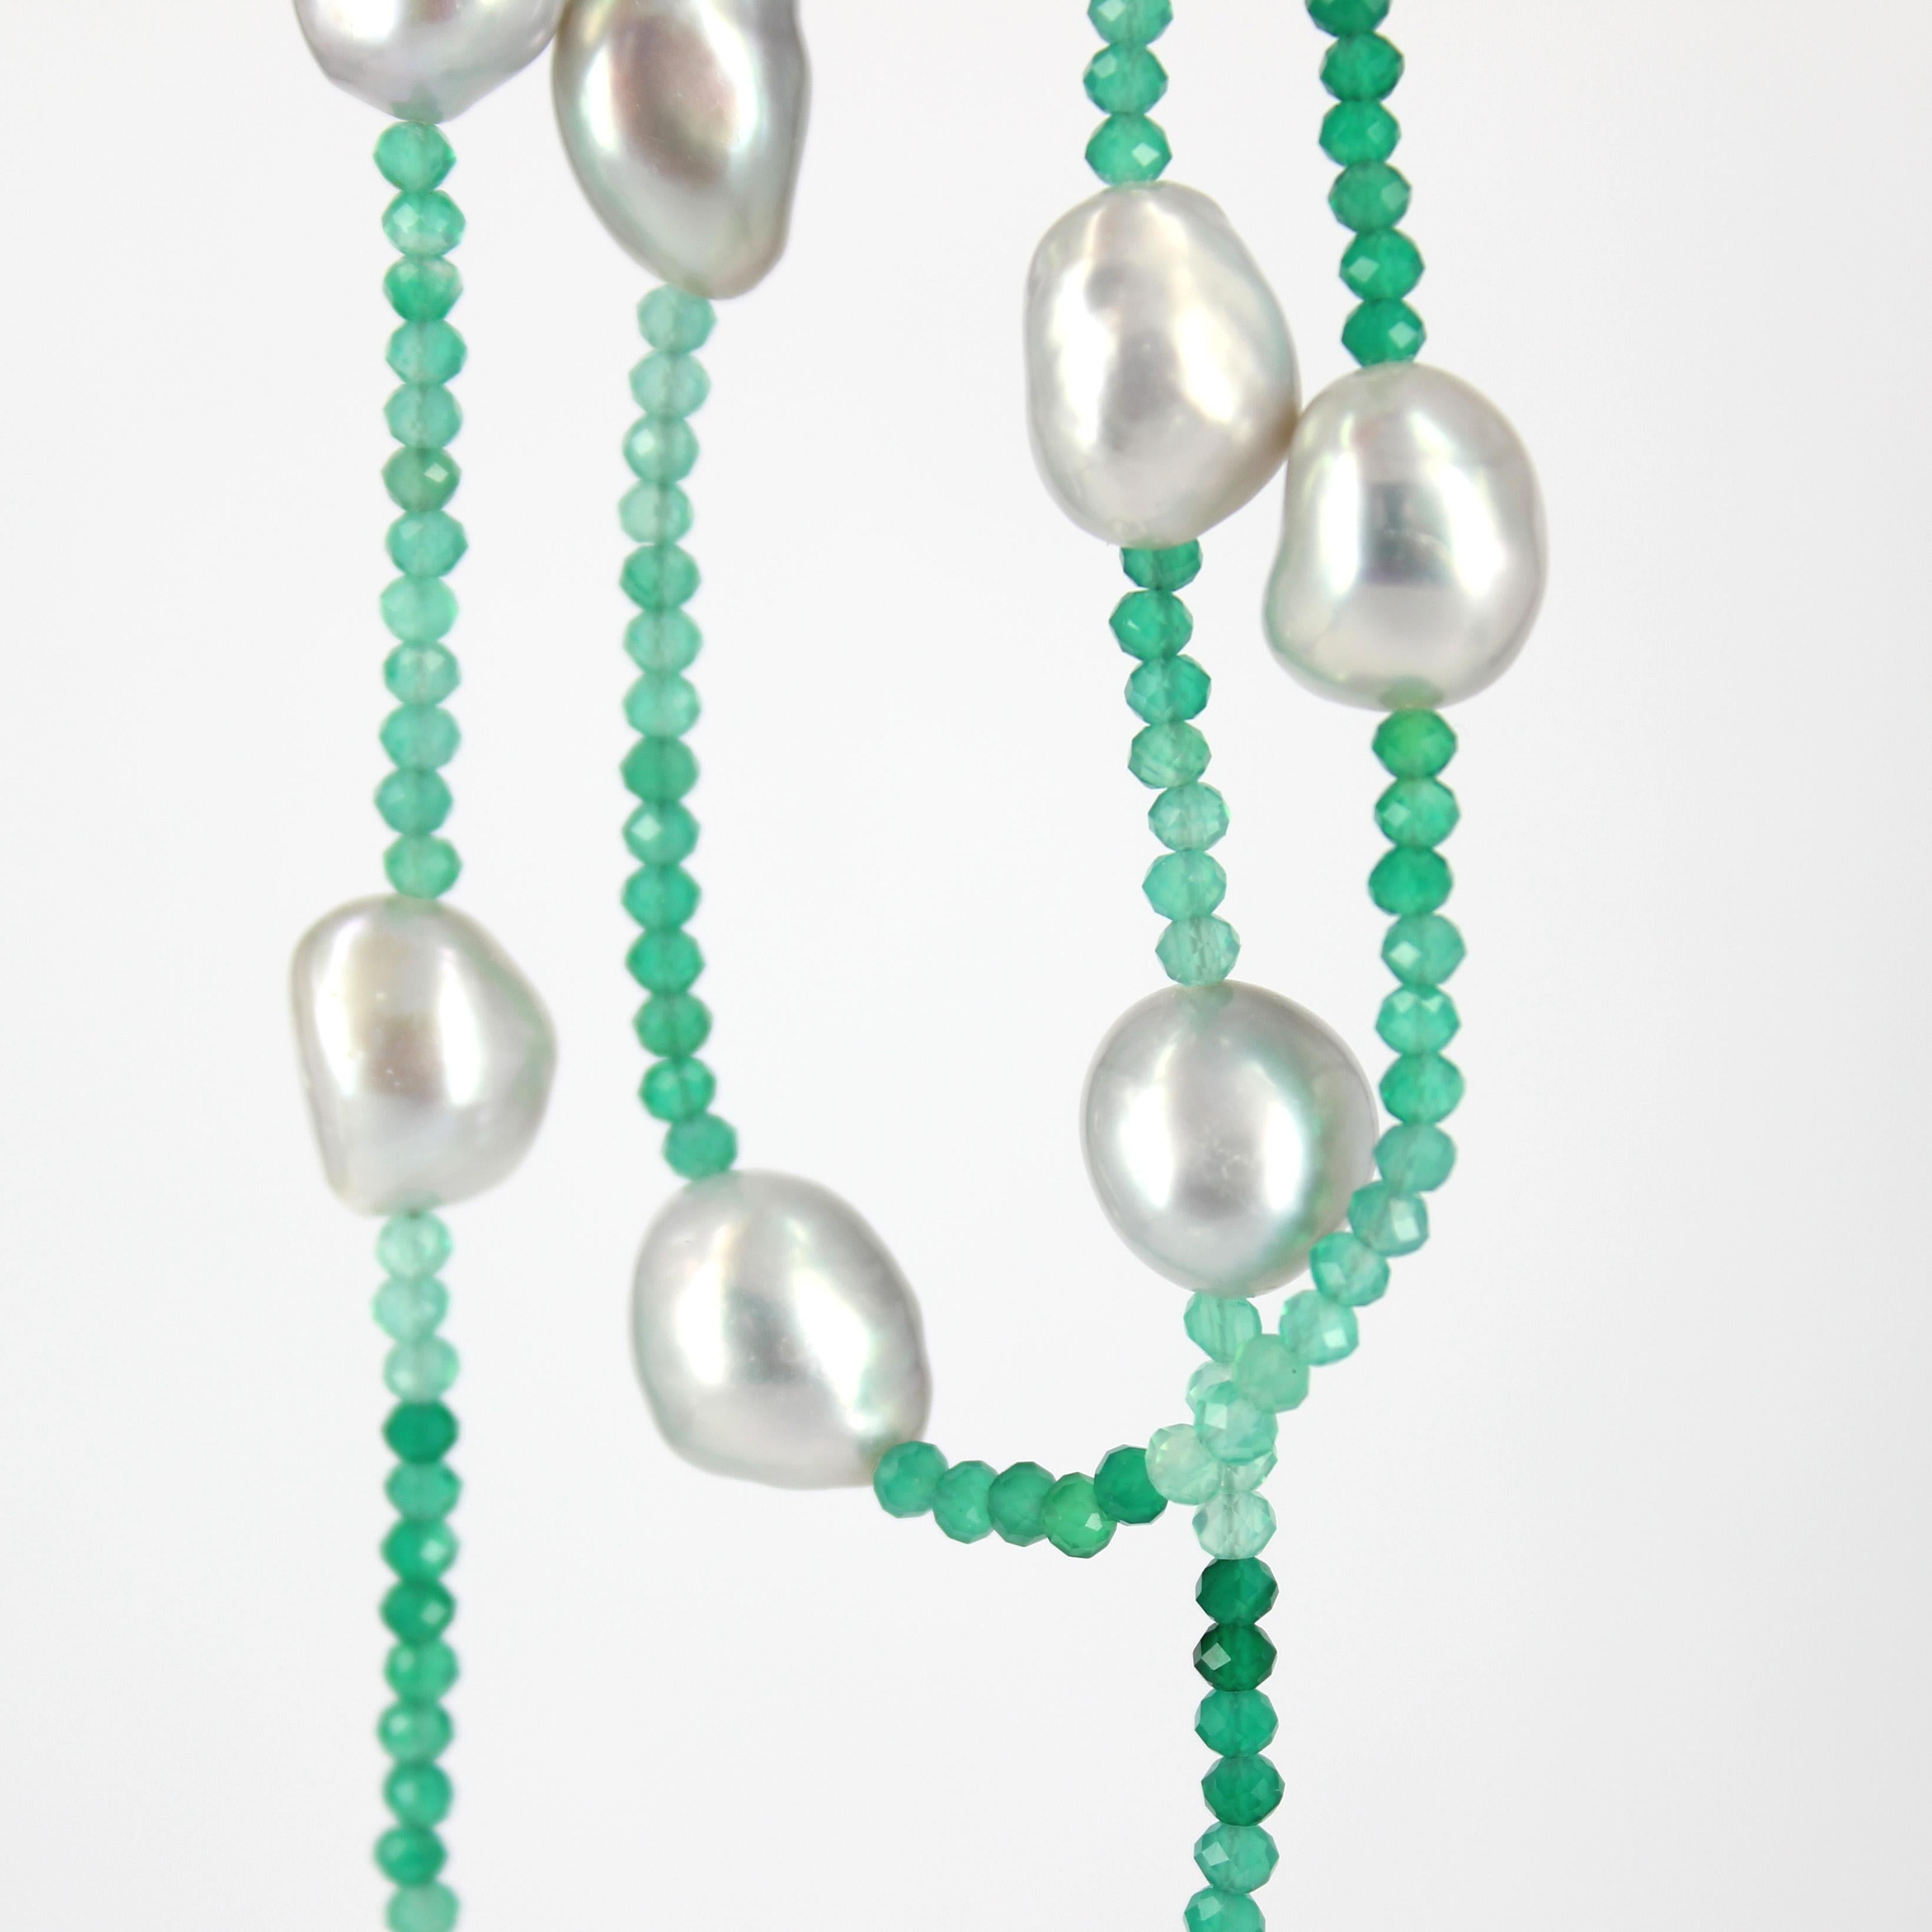 Out in a hurry just throw this simple necklace on and look elegant, you can wear it as a single strand or wrap it around your neck for a double layer effect, this Variegated Faceted Green Onyx, complemented with Silver Lite Grey Fresh Water Pearls,